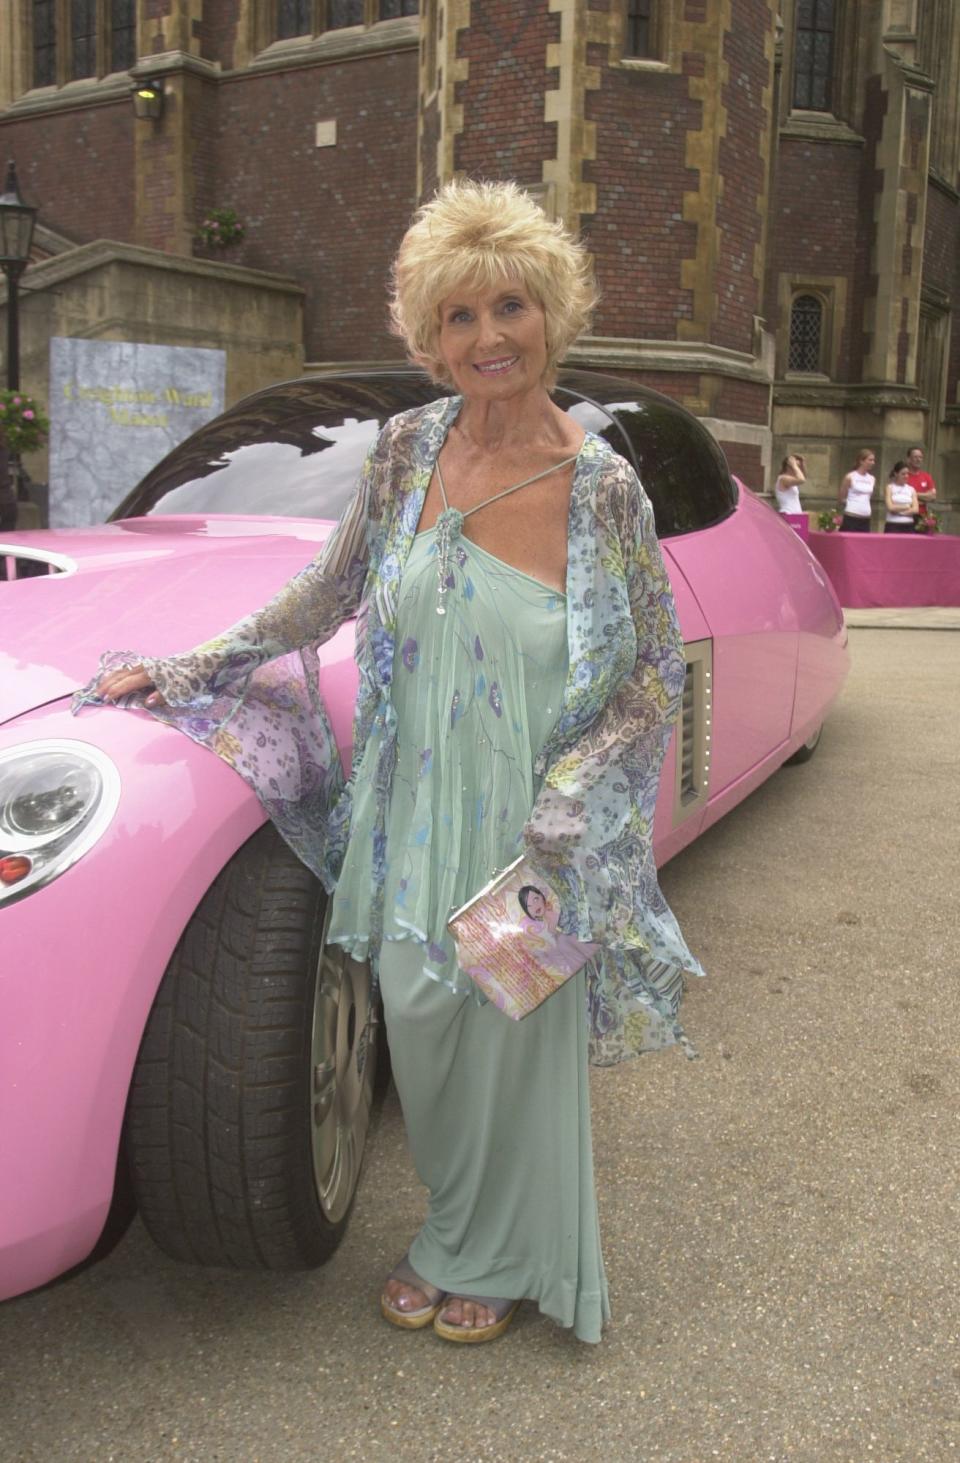 Sylvia Anderson Who Was The Voice Of The Original Lady Penelope In The Thunderbirds Tv Series At The Film Premiere Of Film Thunderbirds At The Empire Leicester Square London Pictured With Lady Penelope's Pink Car From The Film